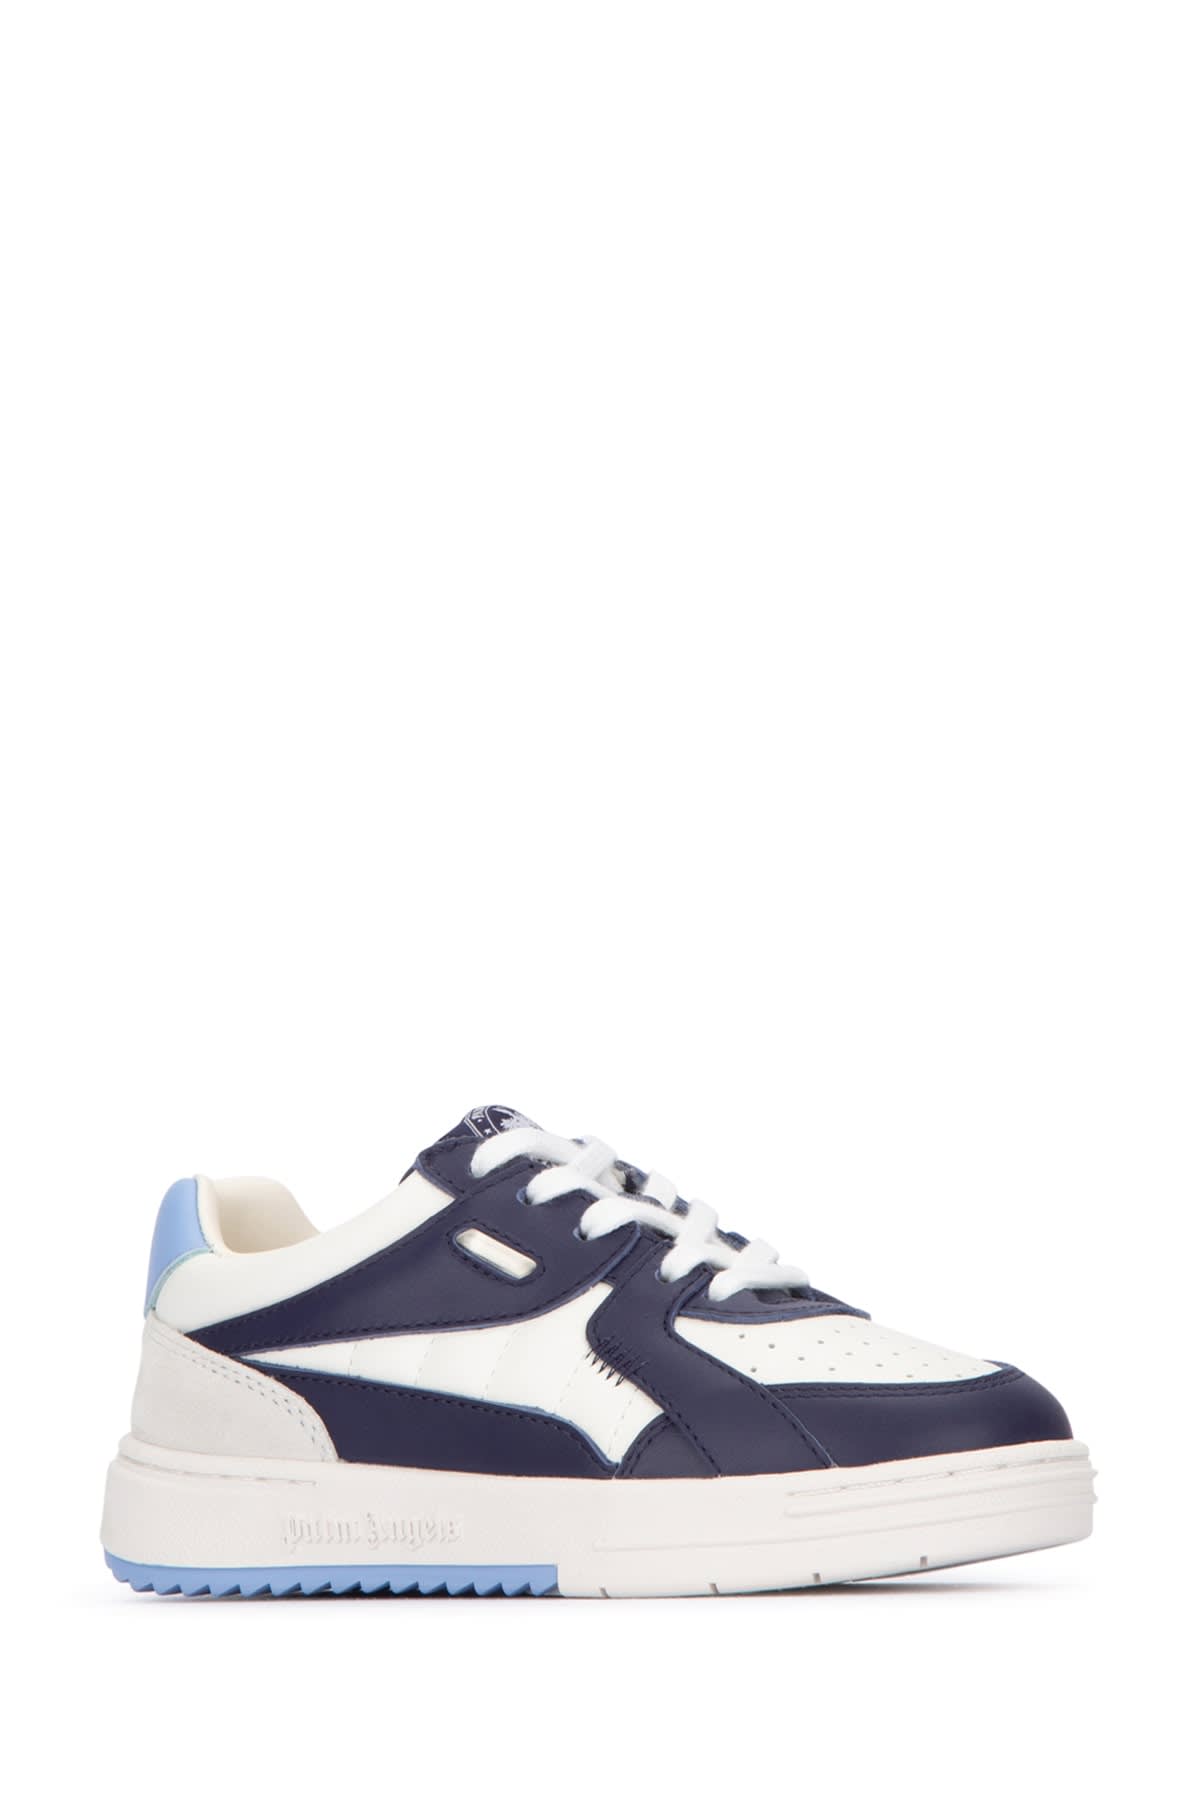 Palm Angels Kids' Sneakers In Whitenavyblue